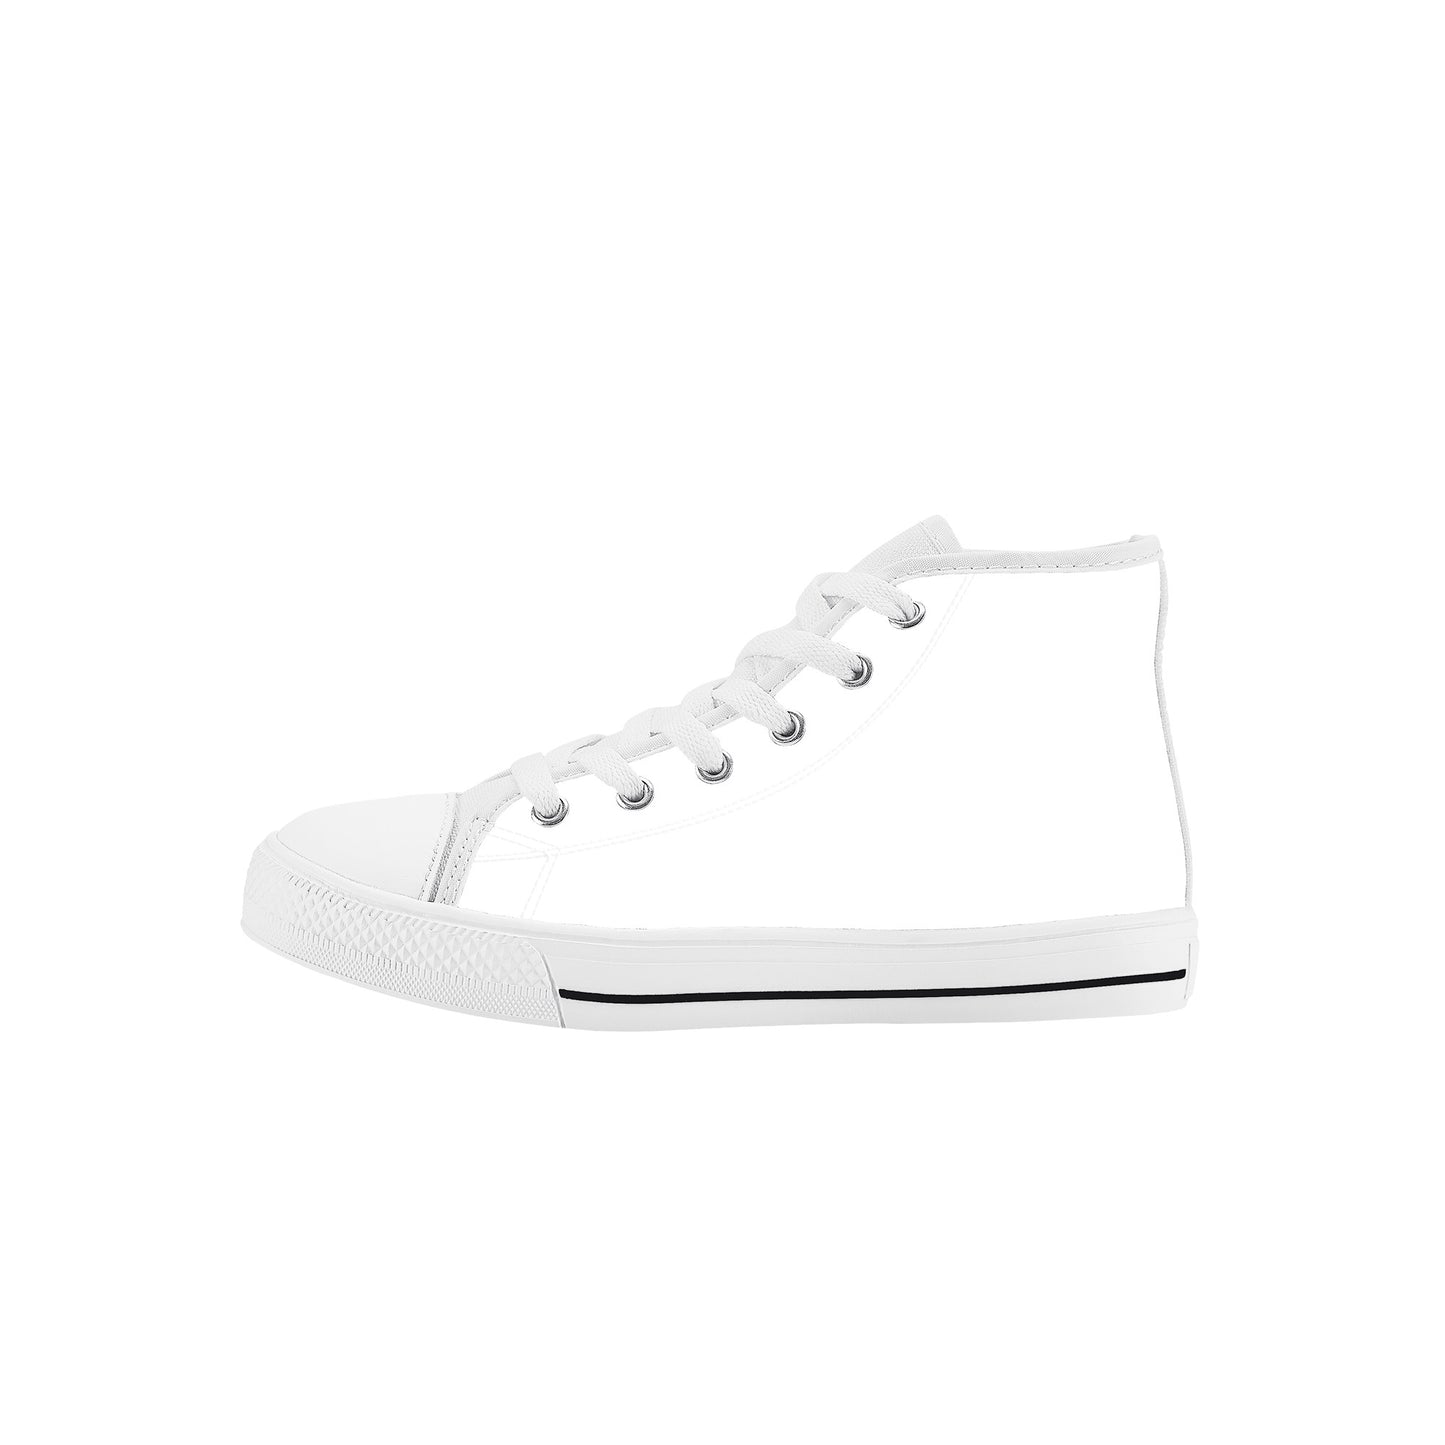 Create You Own Kids High Top Canvas Shoes